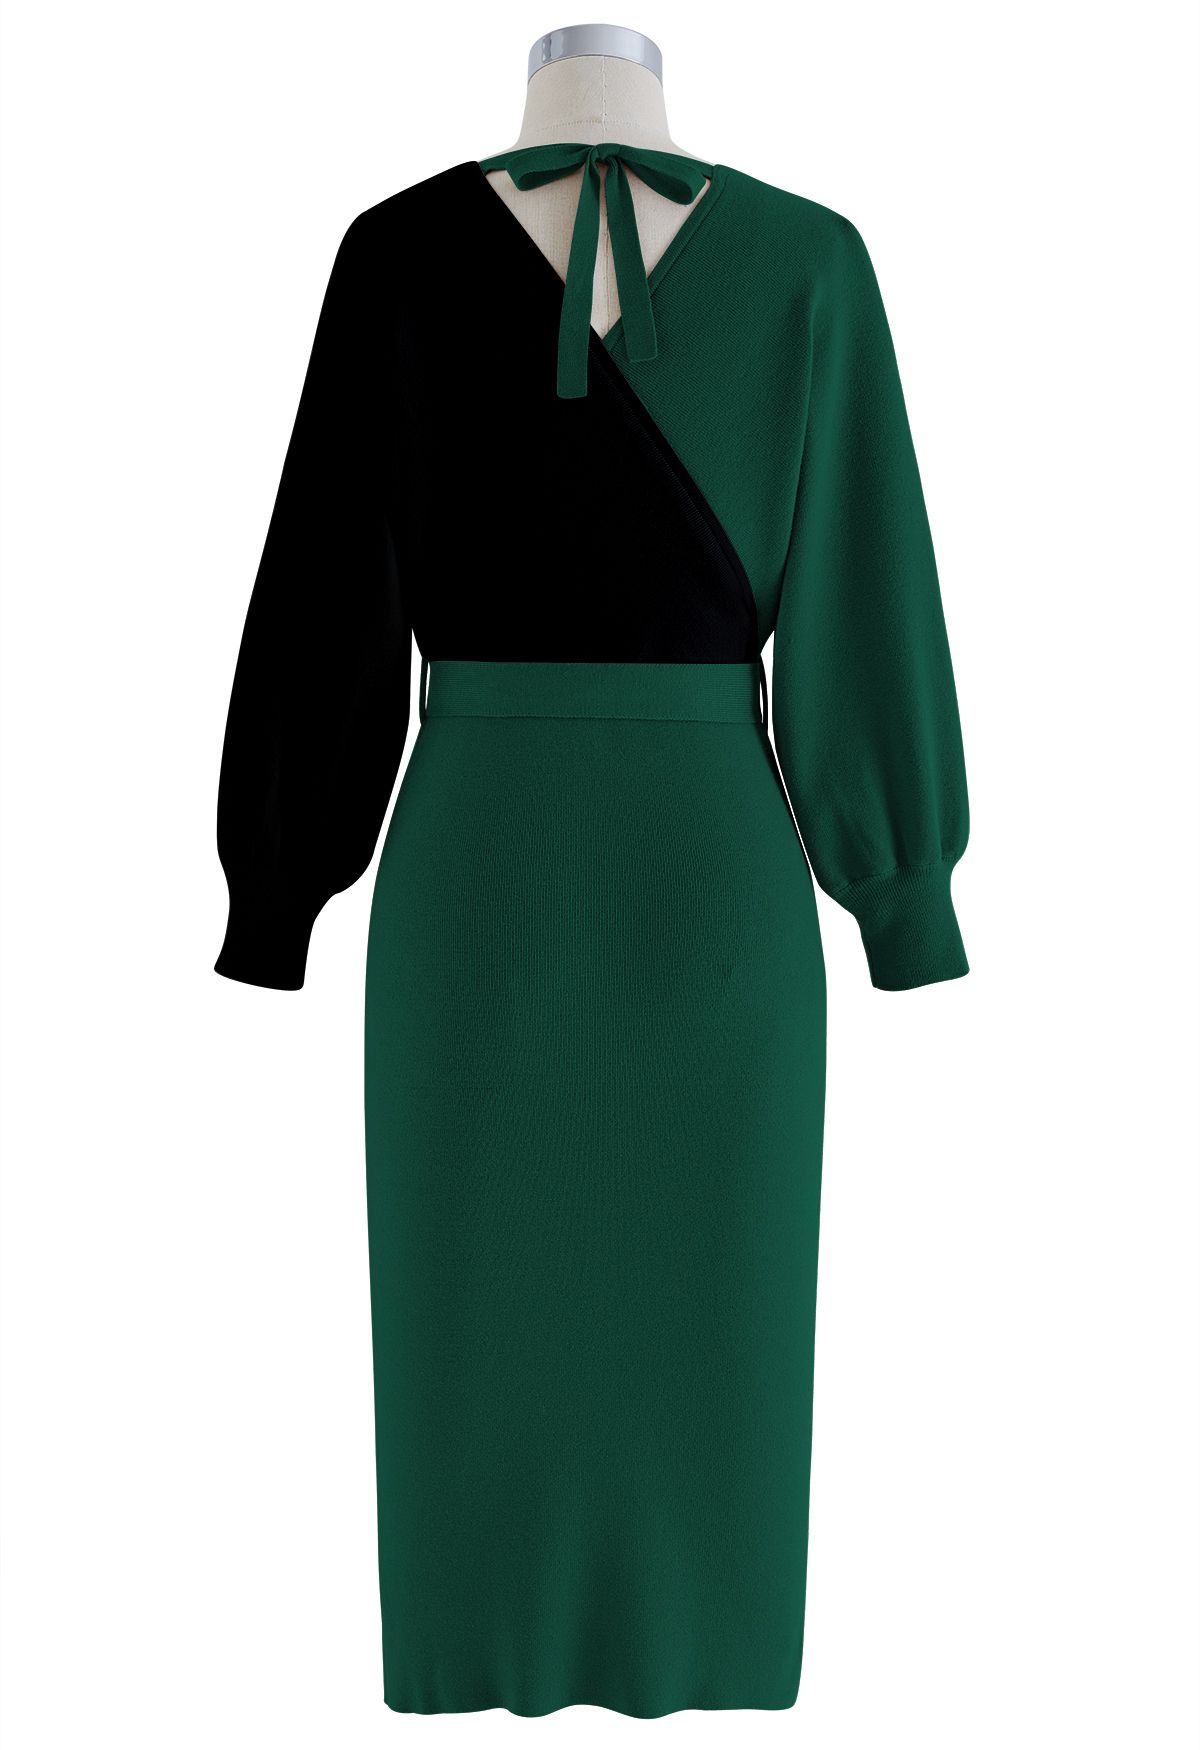 Tie Bow Two-Tone Knit Wrap Midi Dress in Dark Green - Retro, Indie and ...